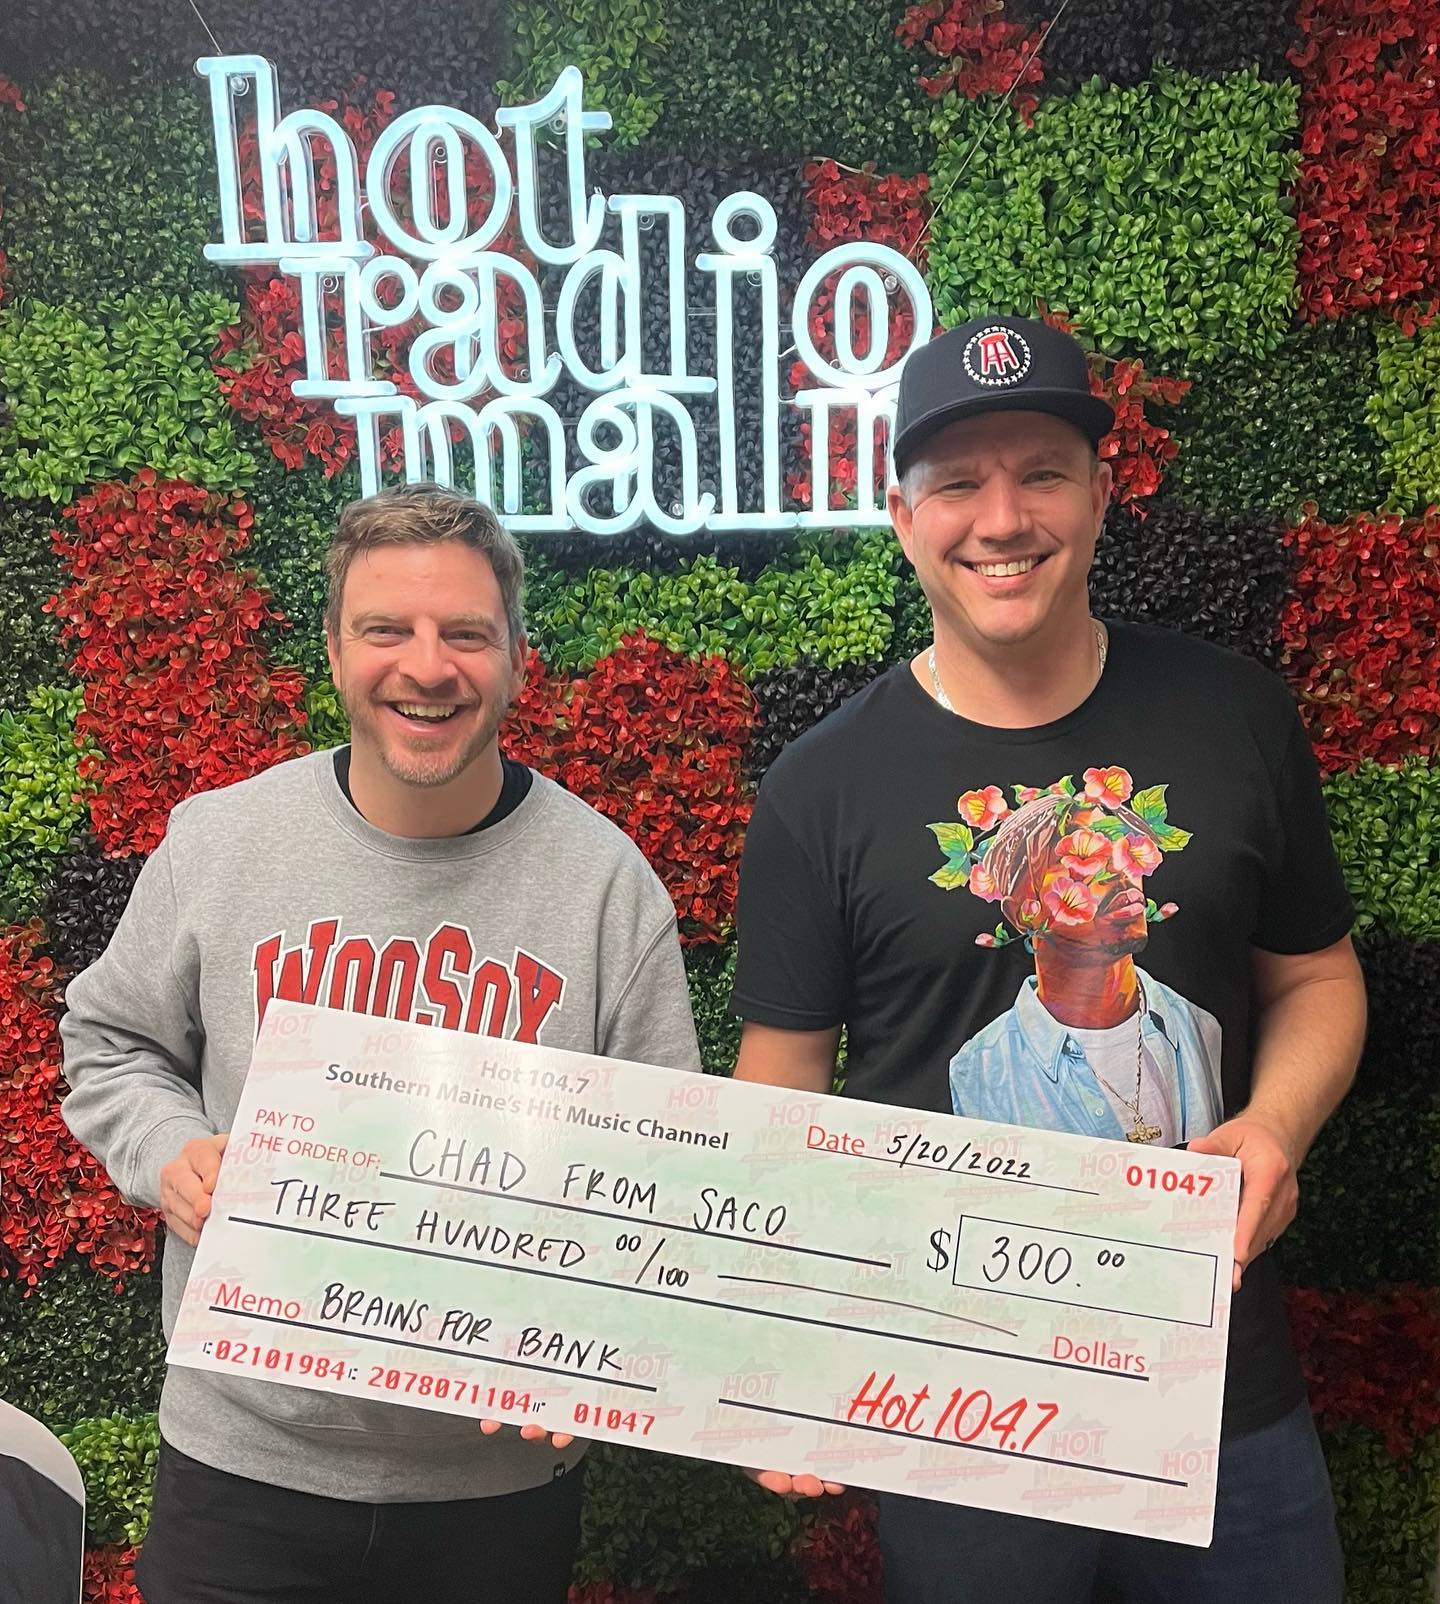 Shout out to Chad from Saco - He just picked up his $300 #BrainsForBank prize! Next chance to play is coming up at 5pm with @aullthat & itâ€™s made Hot in Maine by @leeautomalls ðŸ§ ðŸ¦#MaineMadeWinners